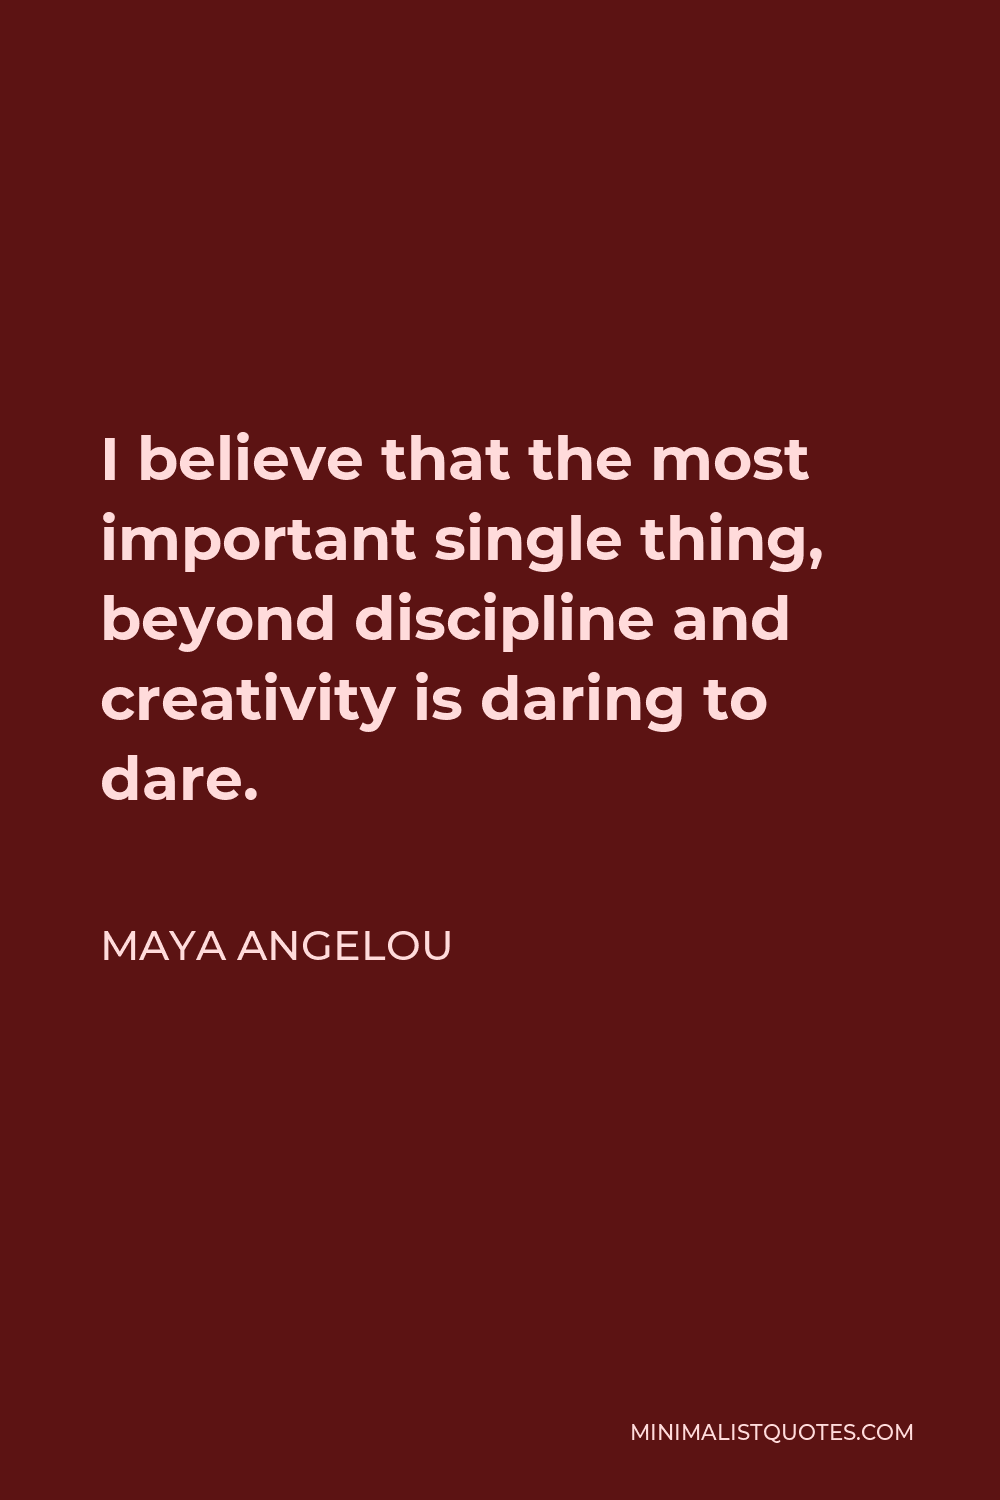 Maya Angelou Quote: I believe that the most important single thing ...